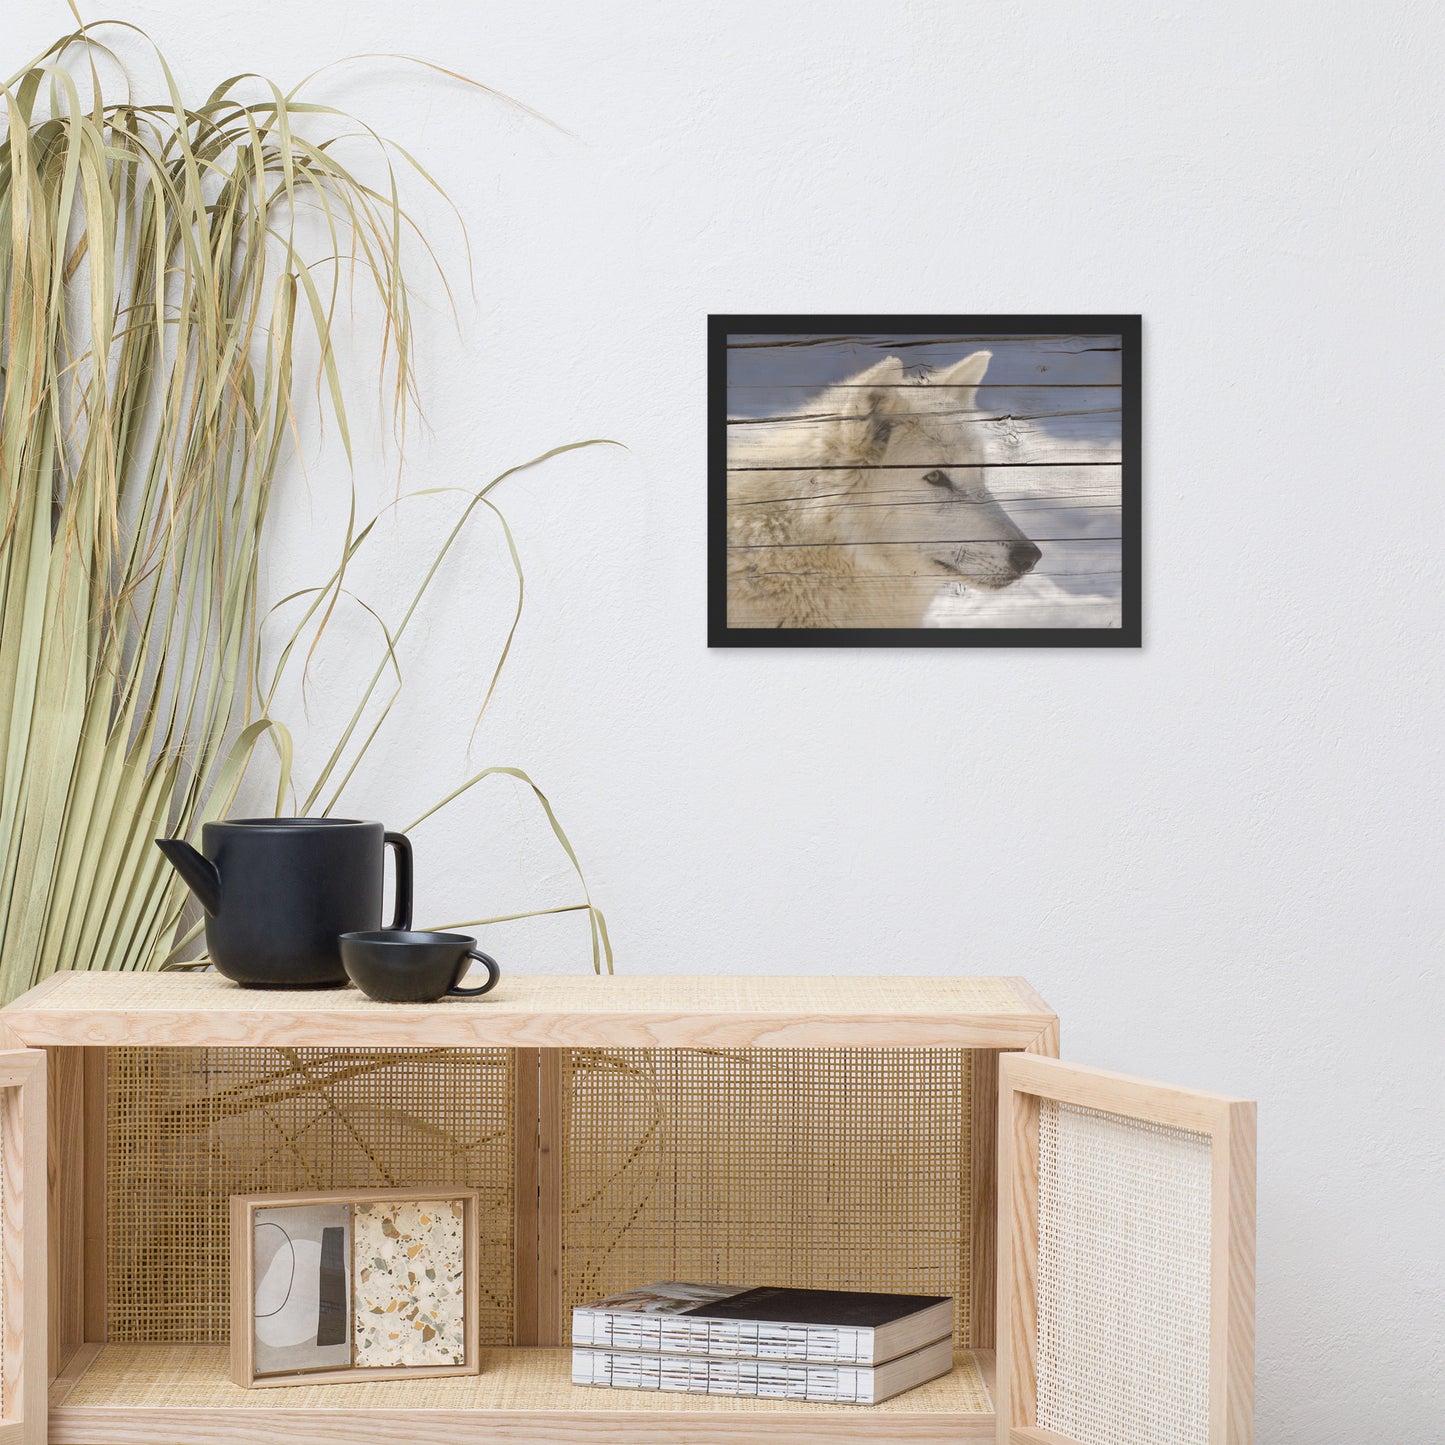 Office Abstract Wall Art: Aries the White Wolf Portrait on Faux Weathered Wood Texture / Animal / Wildlife / Nature Photographic Artwork - Framed Artwork - Wall Decor